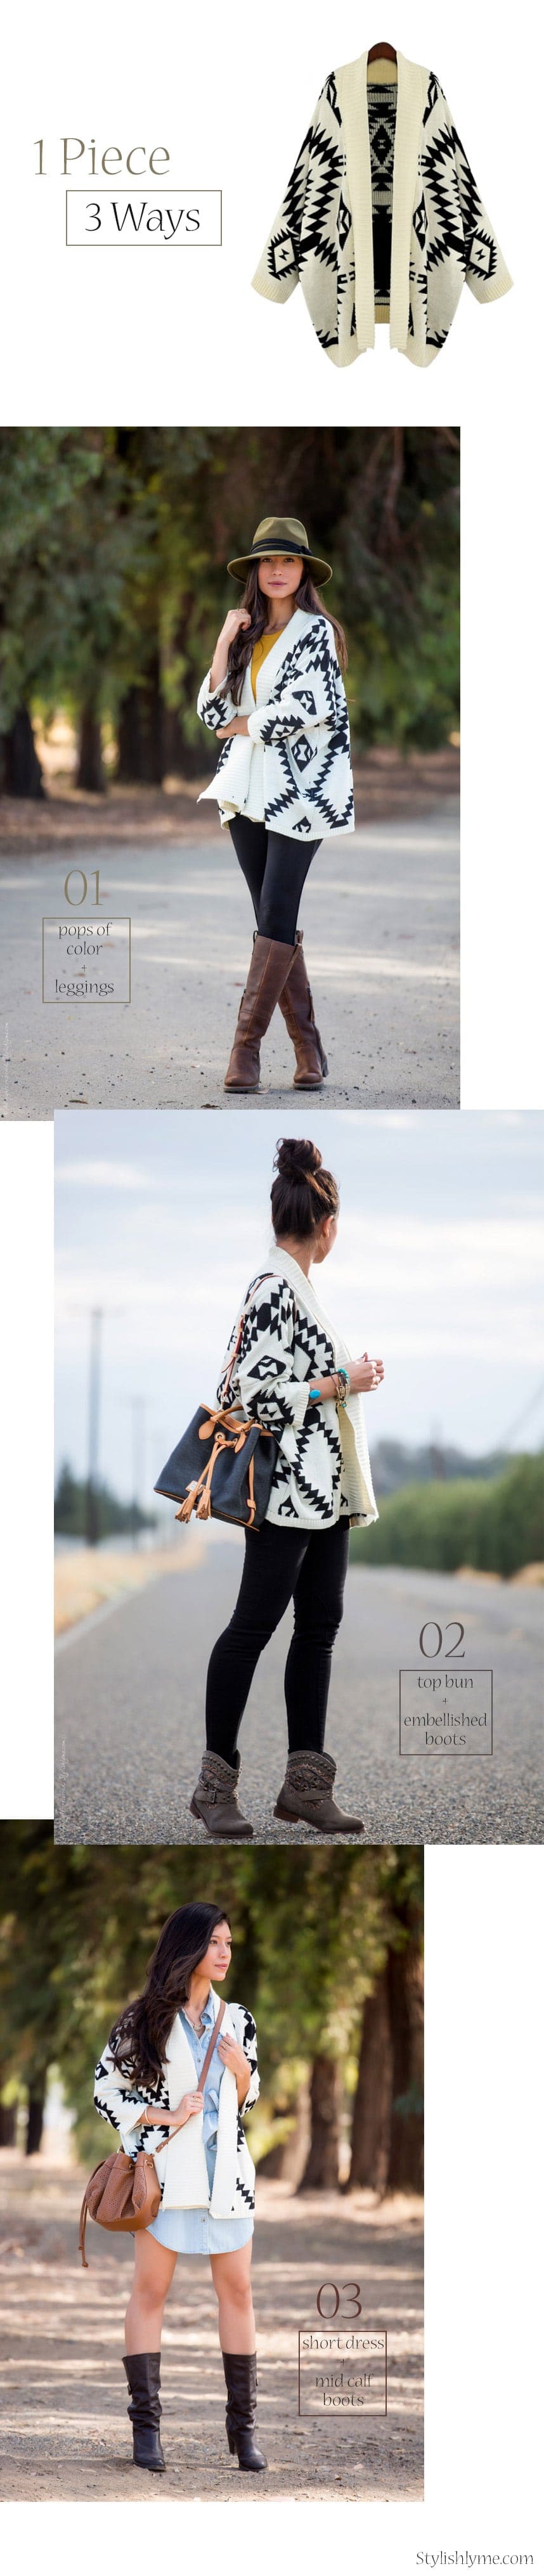 1 Piece 3 Outfits:  Aztec Print Cardigan - Visit Stylishlyme.com for more outfit inspiration and style tips